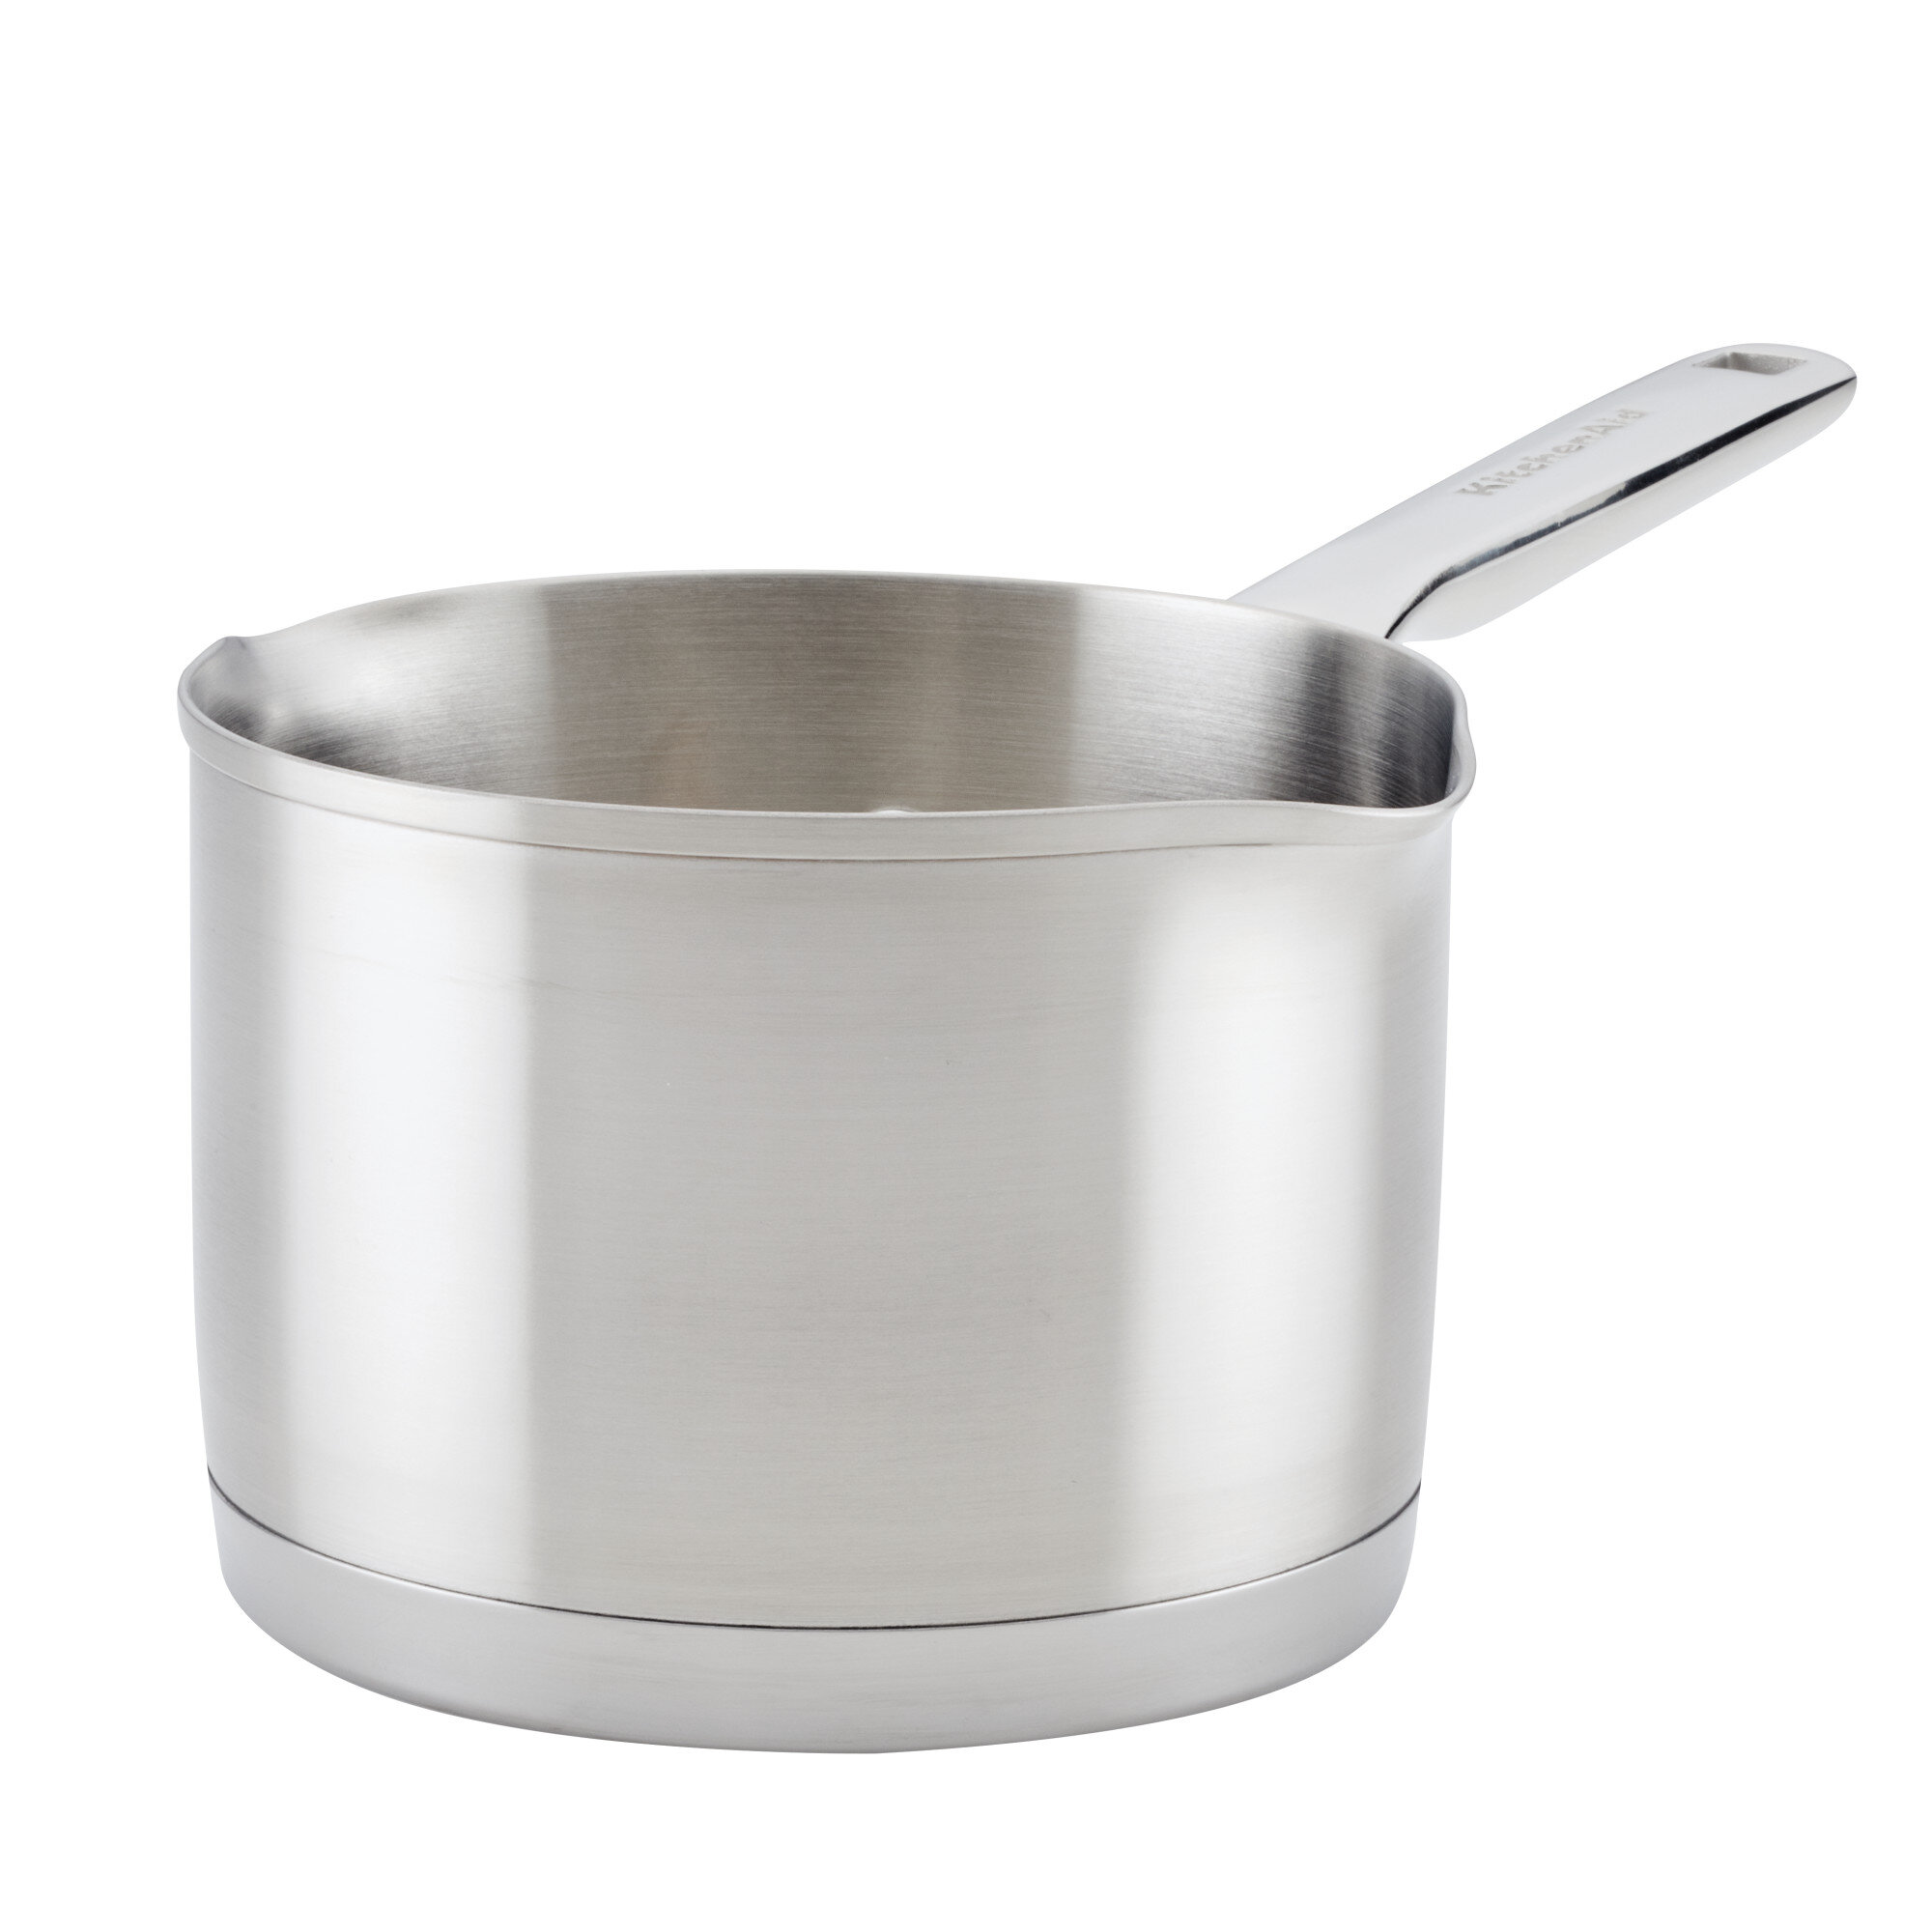 KitchenAid 3 qt. 3-Ply Base Stainless Steel Induction Sauce Pan with Lid, 3 qt., Brushed Stainless Steel